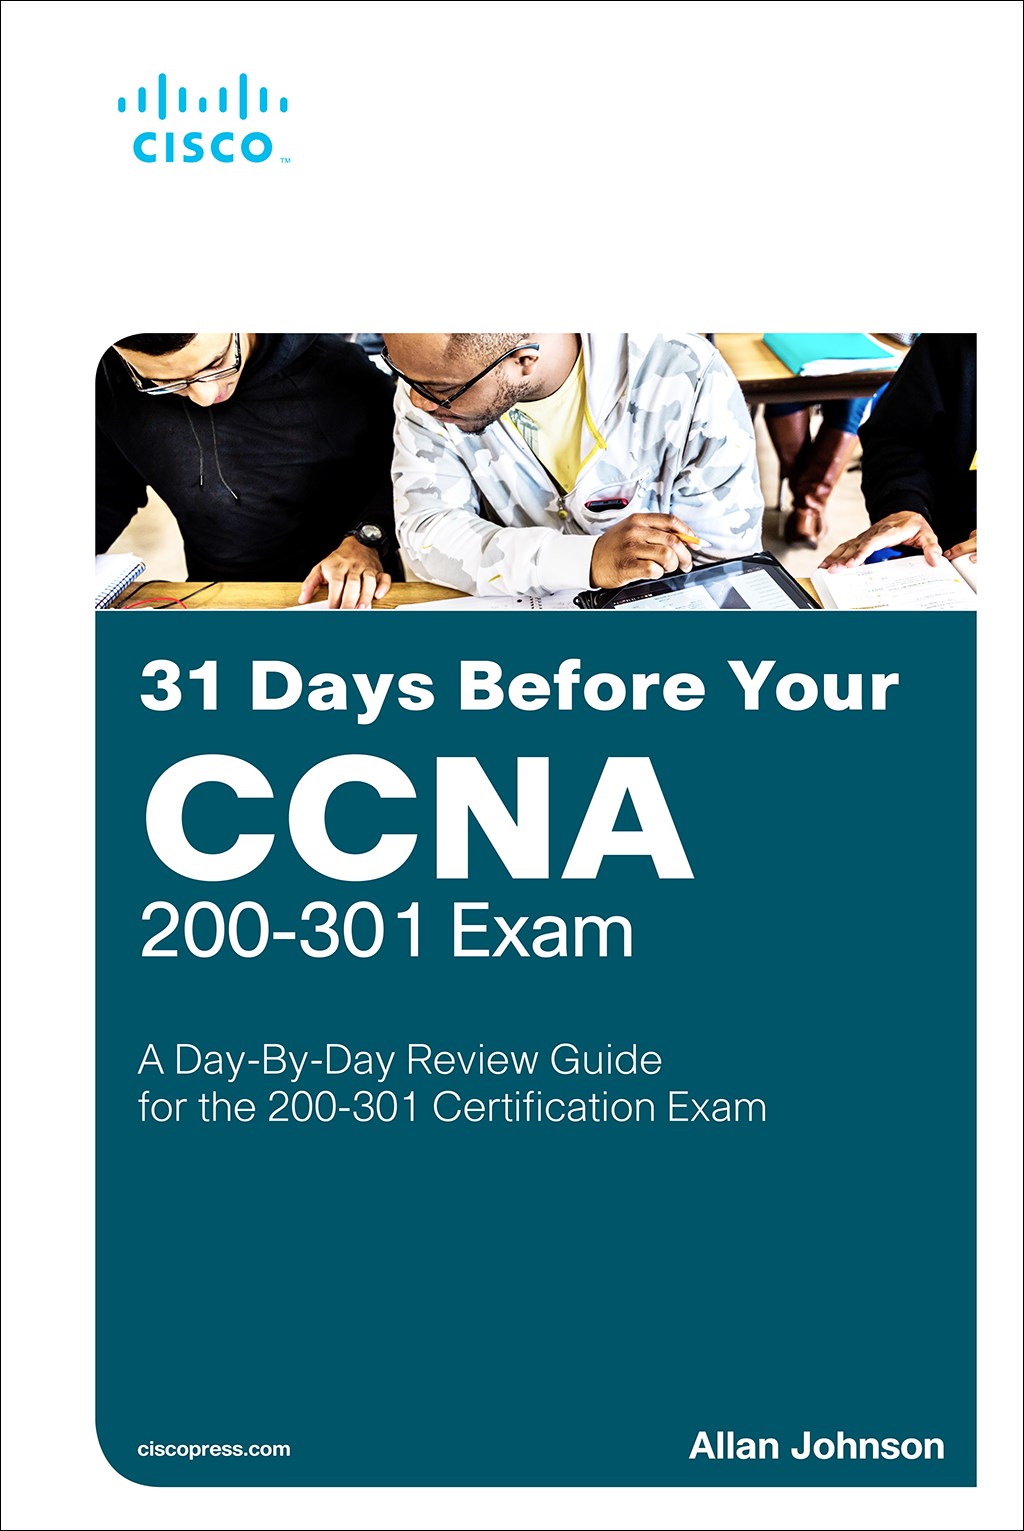 31 Days Before your CCNA Exam: A Day-By-Day Review Guide for the CCNA 200-301 Certification Exam